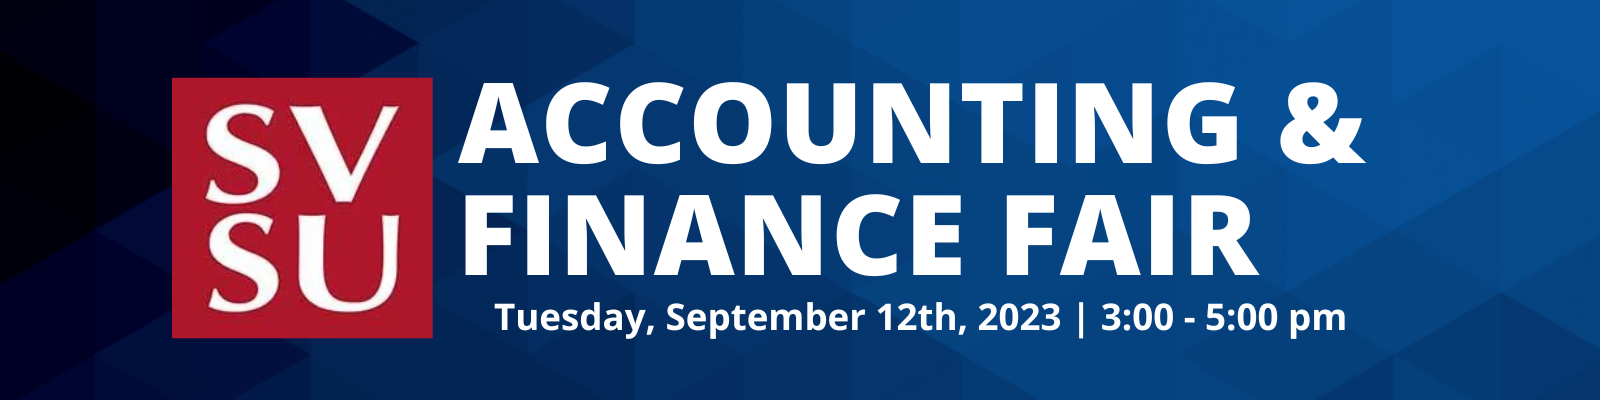 2023 Accounting and Finance Fair Sep 14 3pm-5pm